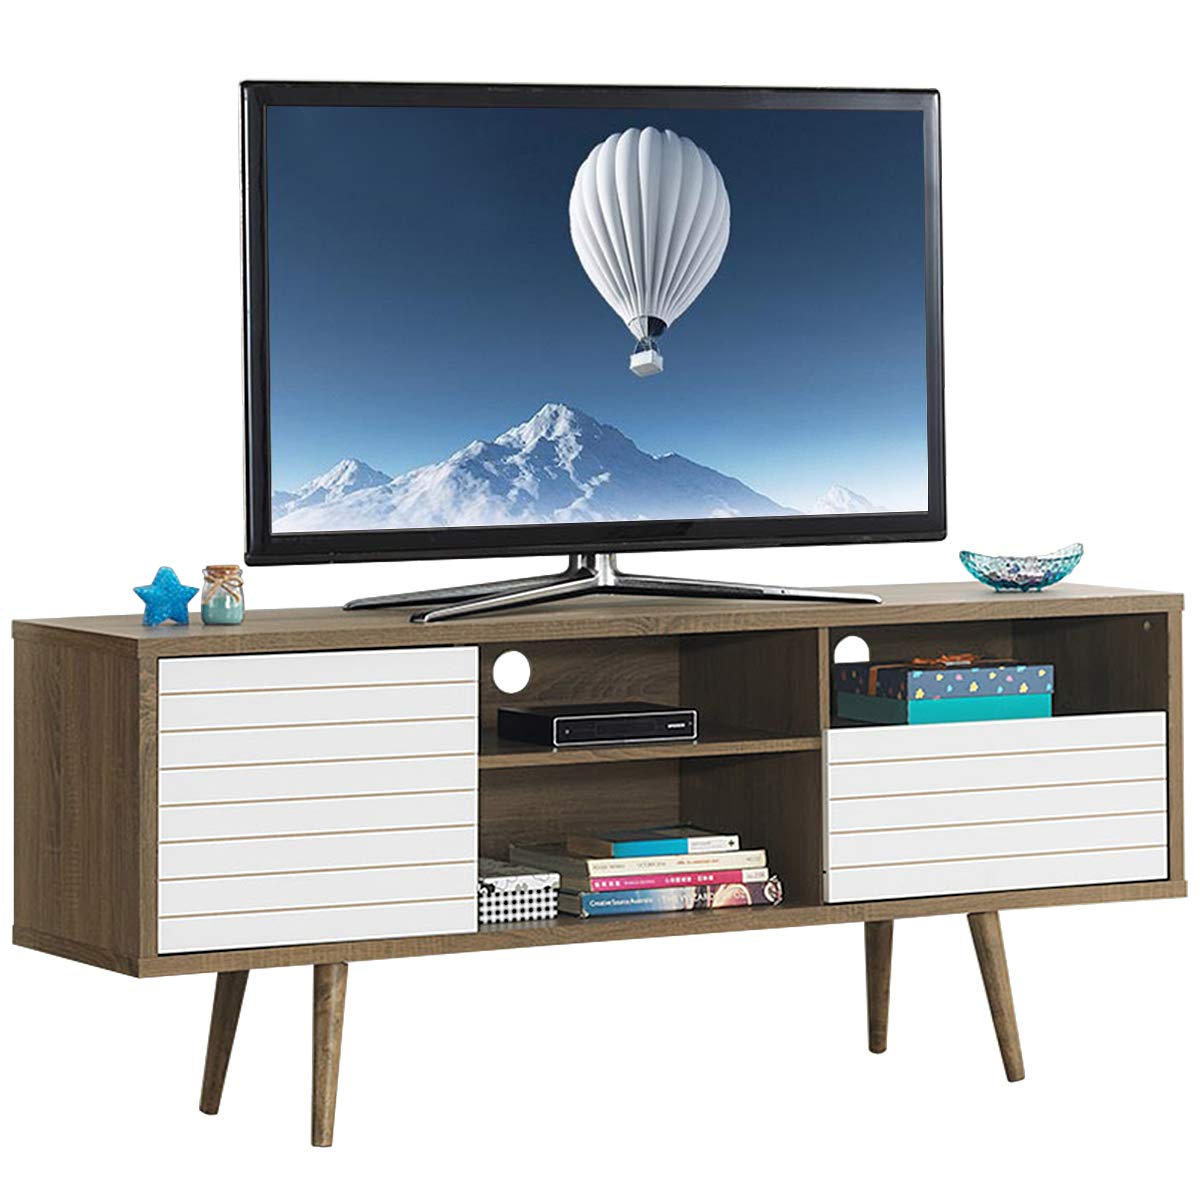 Tangkula Mid-Century Modern TV Stand for TVs up to 65 Inch, Wooden TV Console Table with Storage Shelves